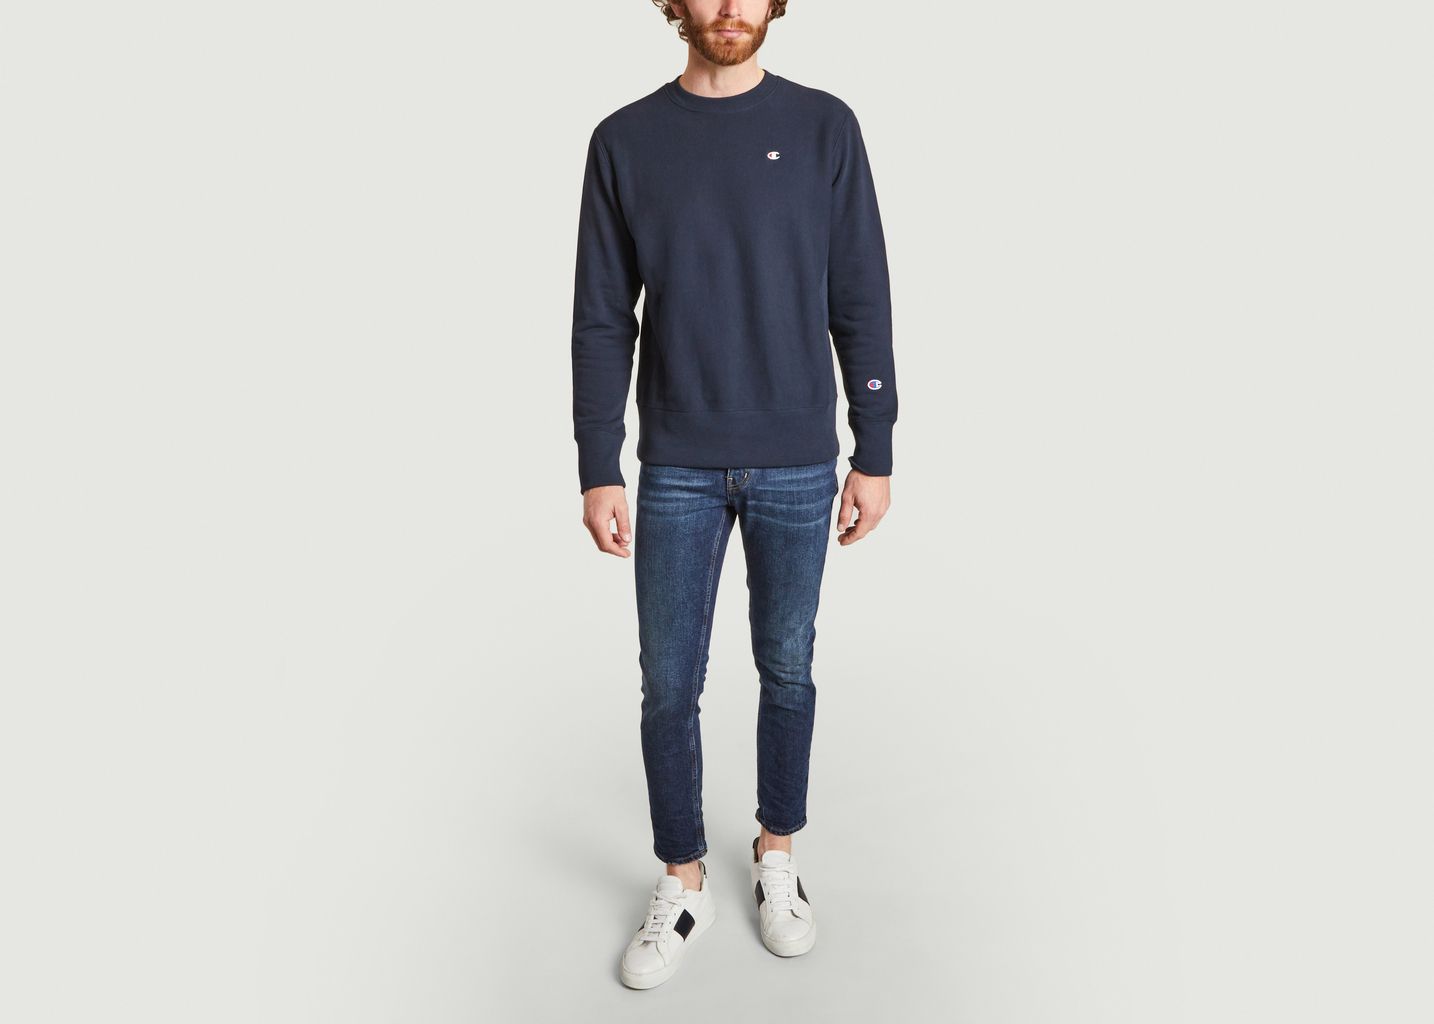 Cleveland cropped skinny jeans - haikure